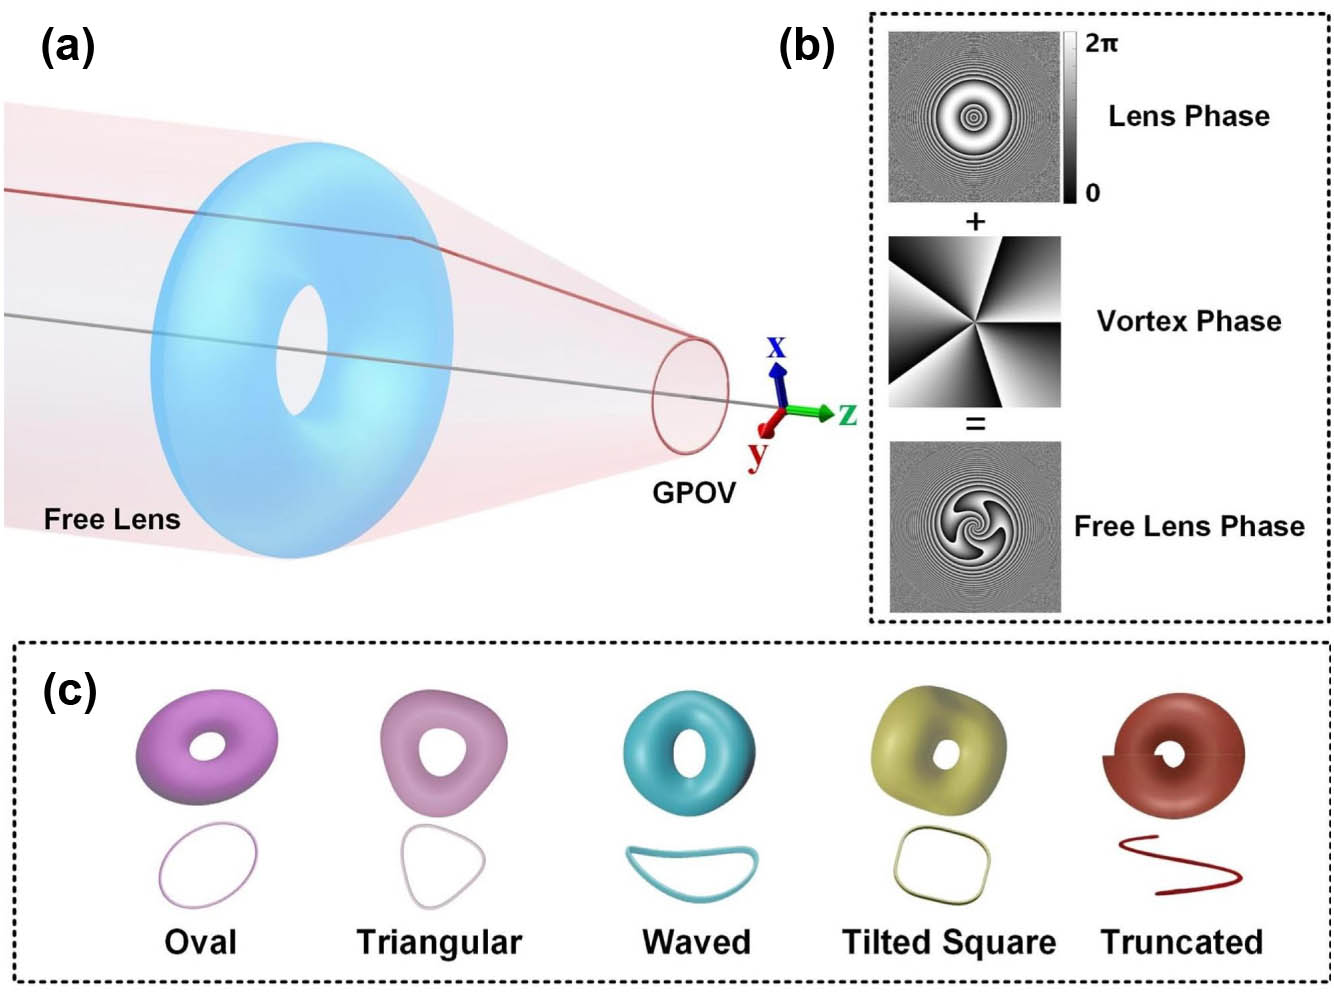 Principle of the FLM method. (a) Abridged general view of the free lens modulation (FLM) method. (b) Superposition of the annular lens and the vortex phase to generate the free lens. (c) Models of various free lenses and the corresponding GPOV profiles.